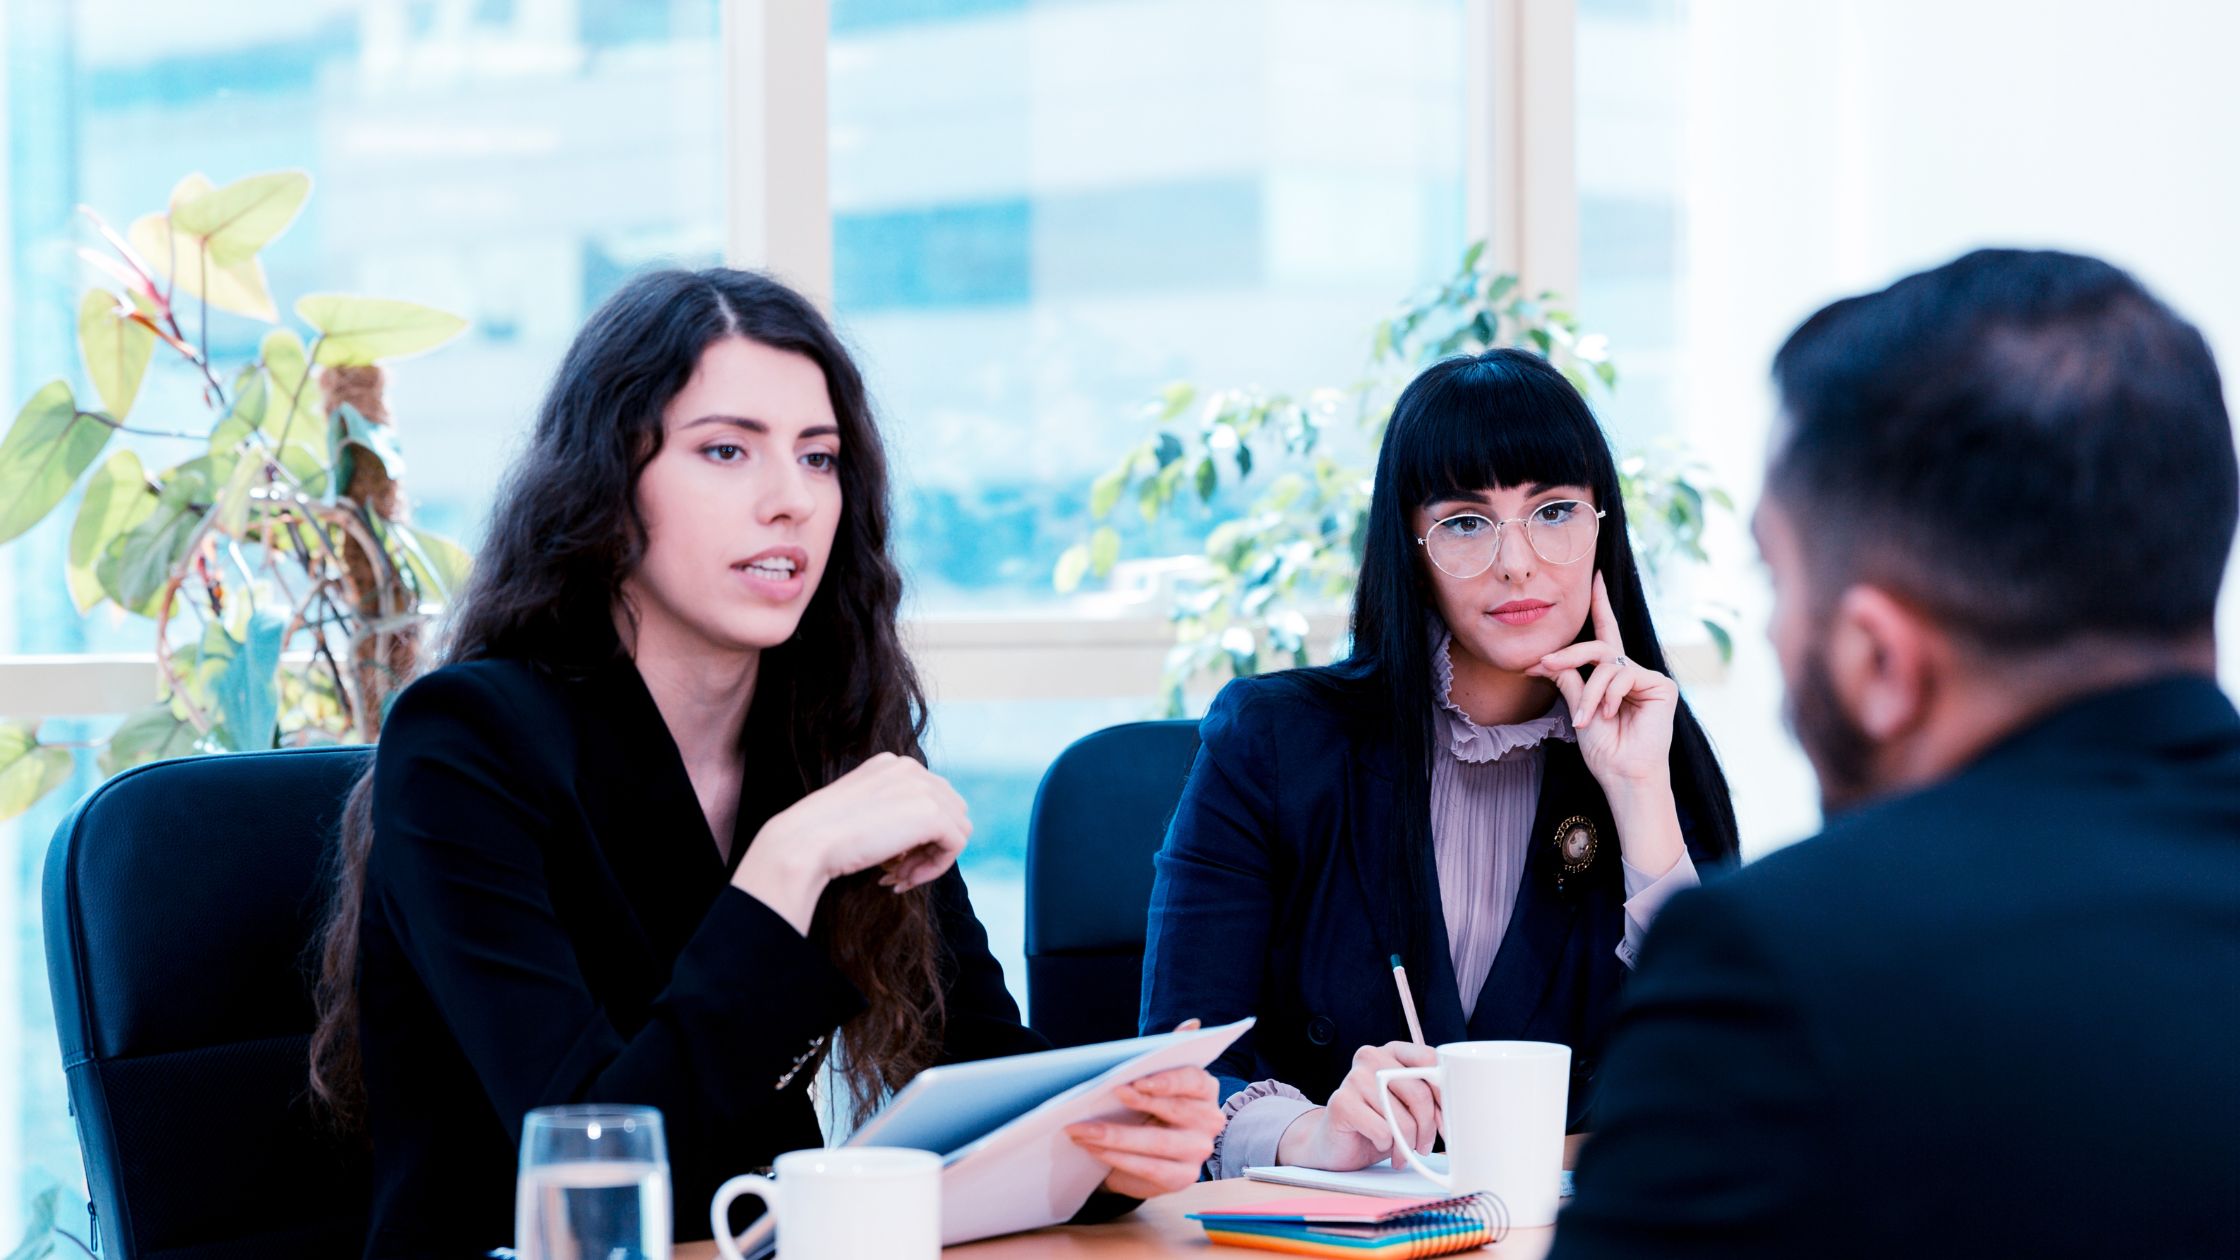 wo professional women attentively listening to a man during a discussion, reflecting a strategic meeting on common defenses used by insurance companies in personal injury cases.